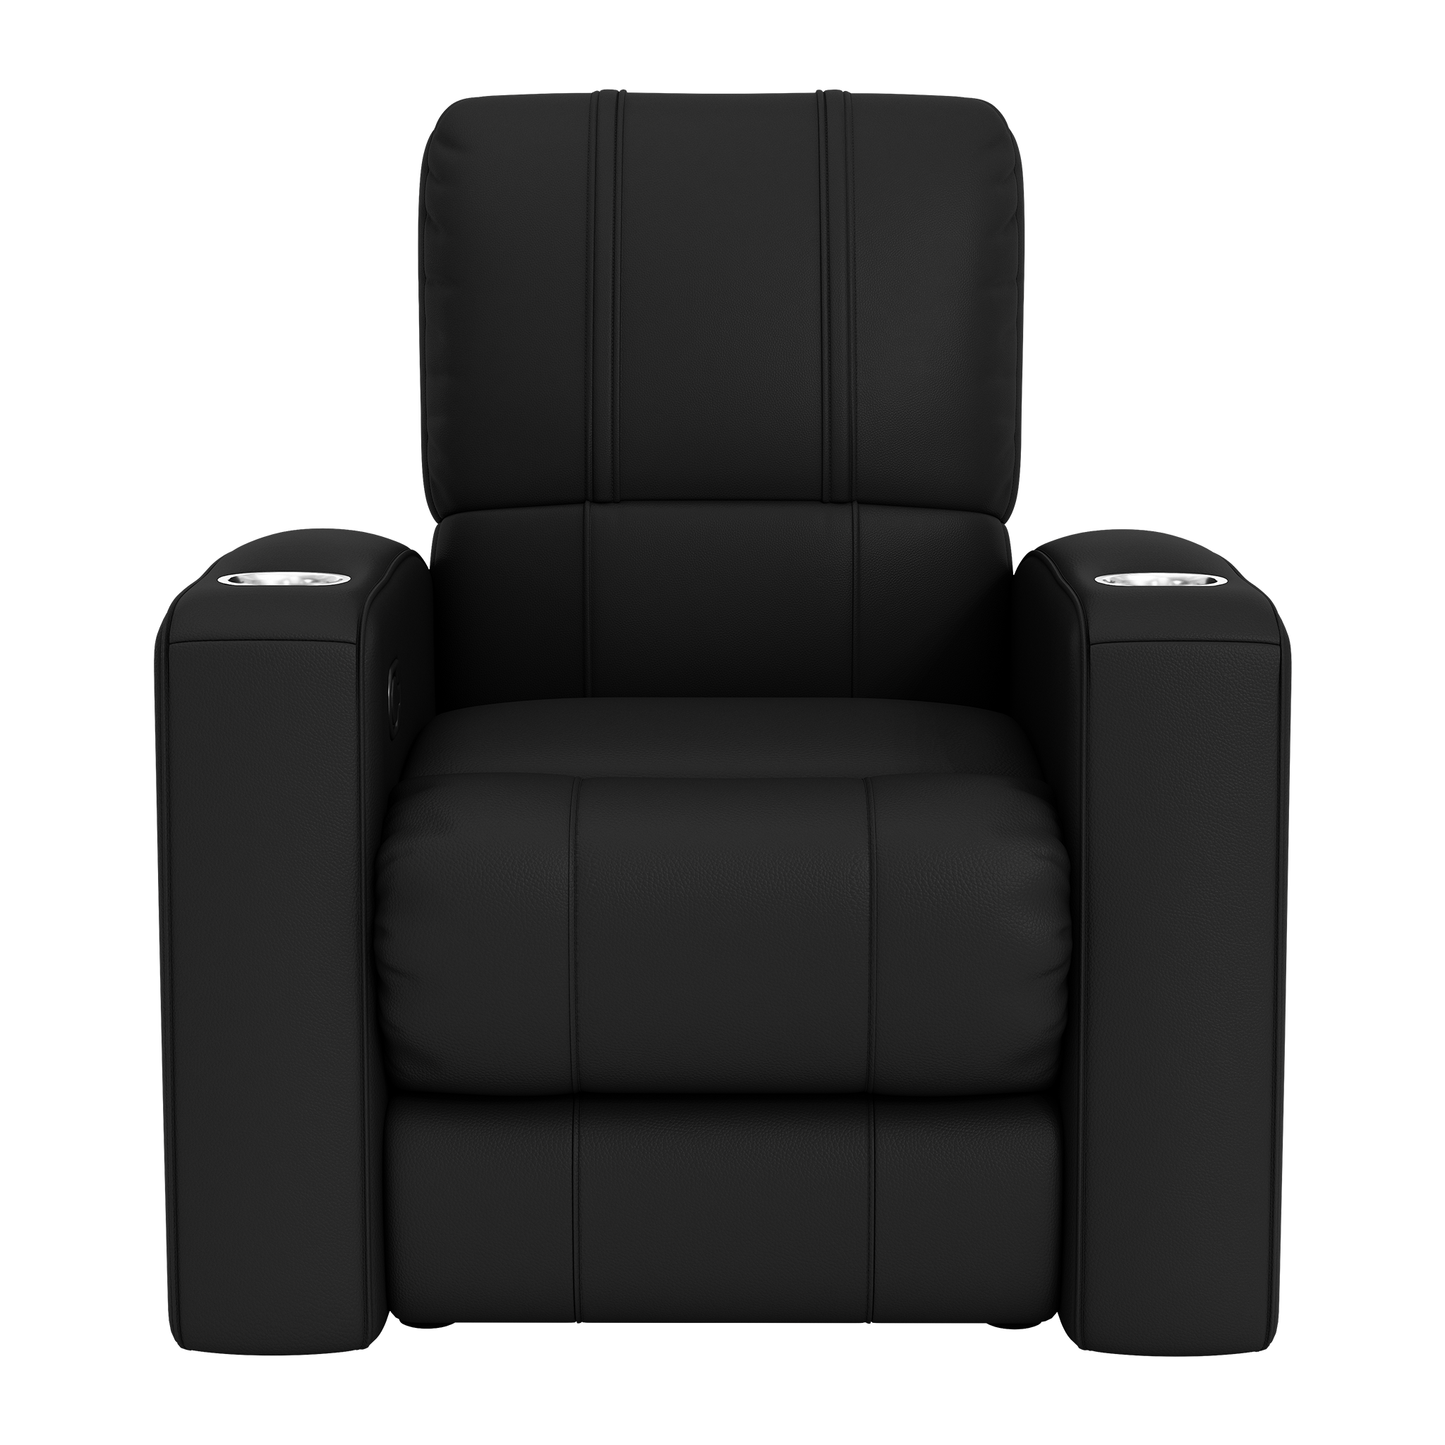 Relax Home Theater Recliner with Cincinnati Reds Logo